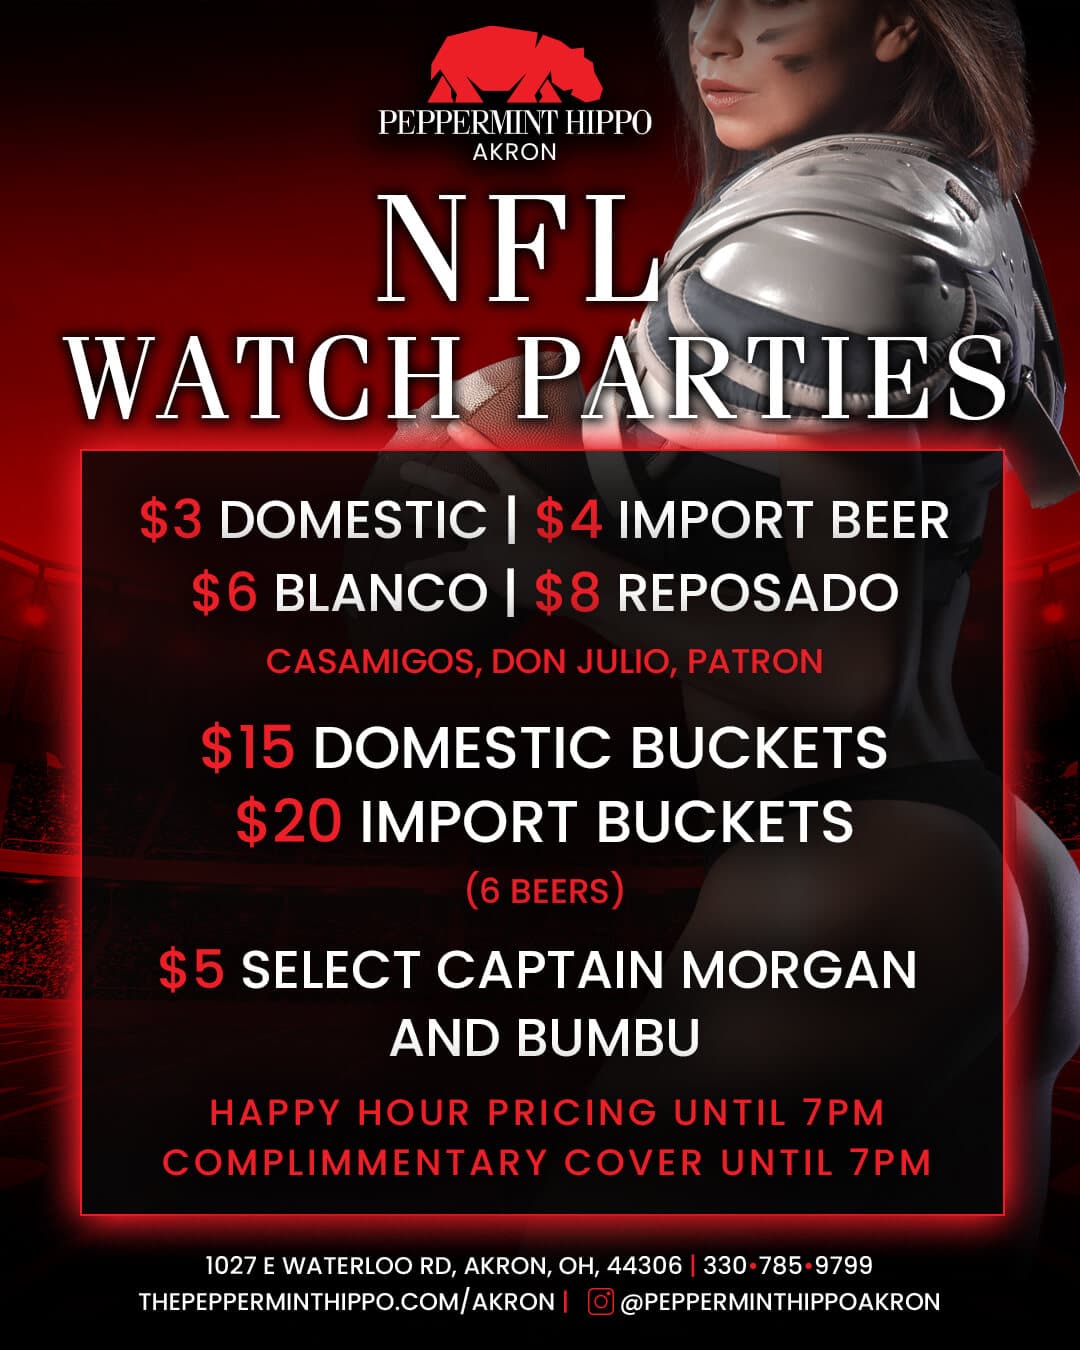 NFL Watch Party Specials at Peppermint Hippo Akron